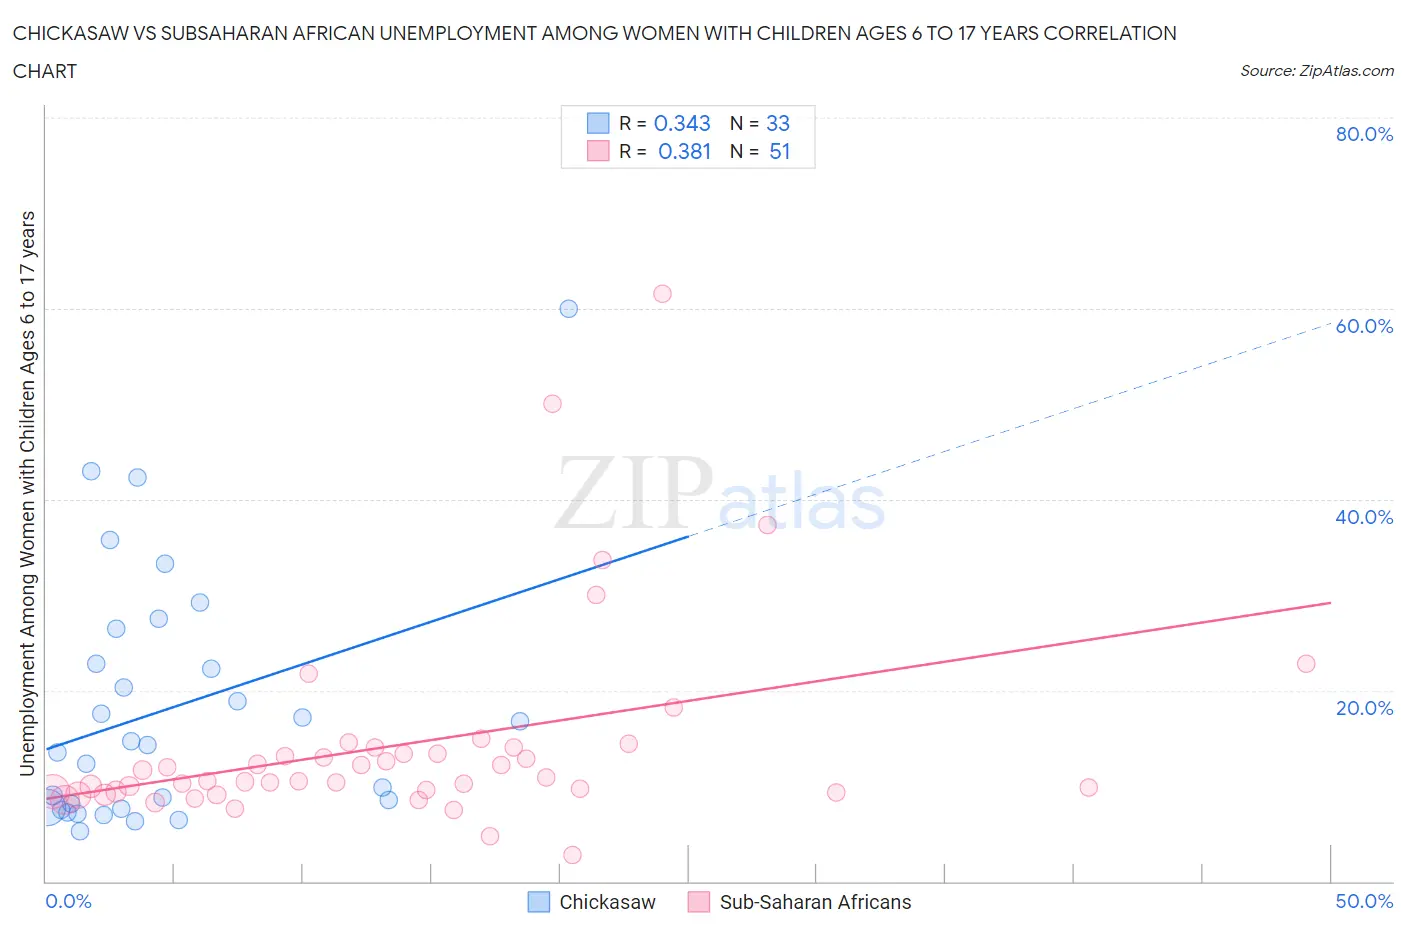 Chickasaw vs Subsaharan African Unemployment Among Women with Children Ages 6 to 17 years